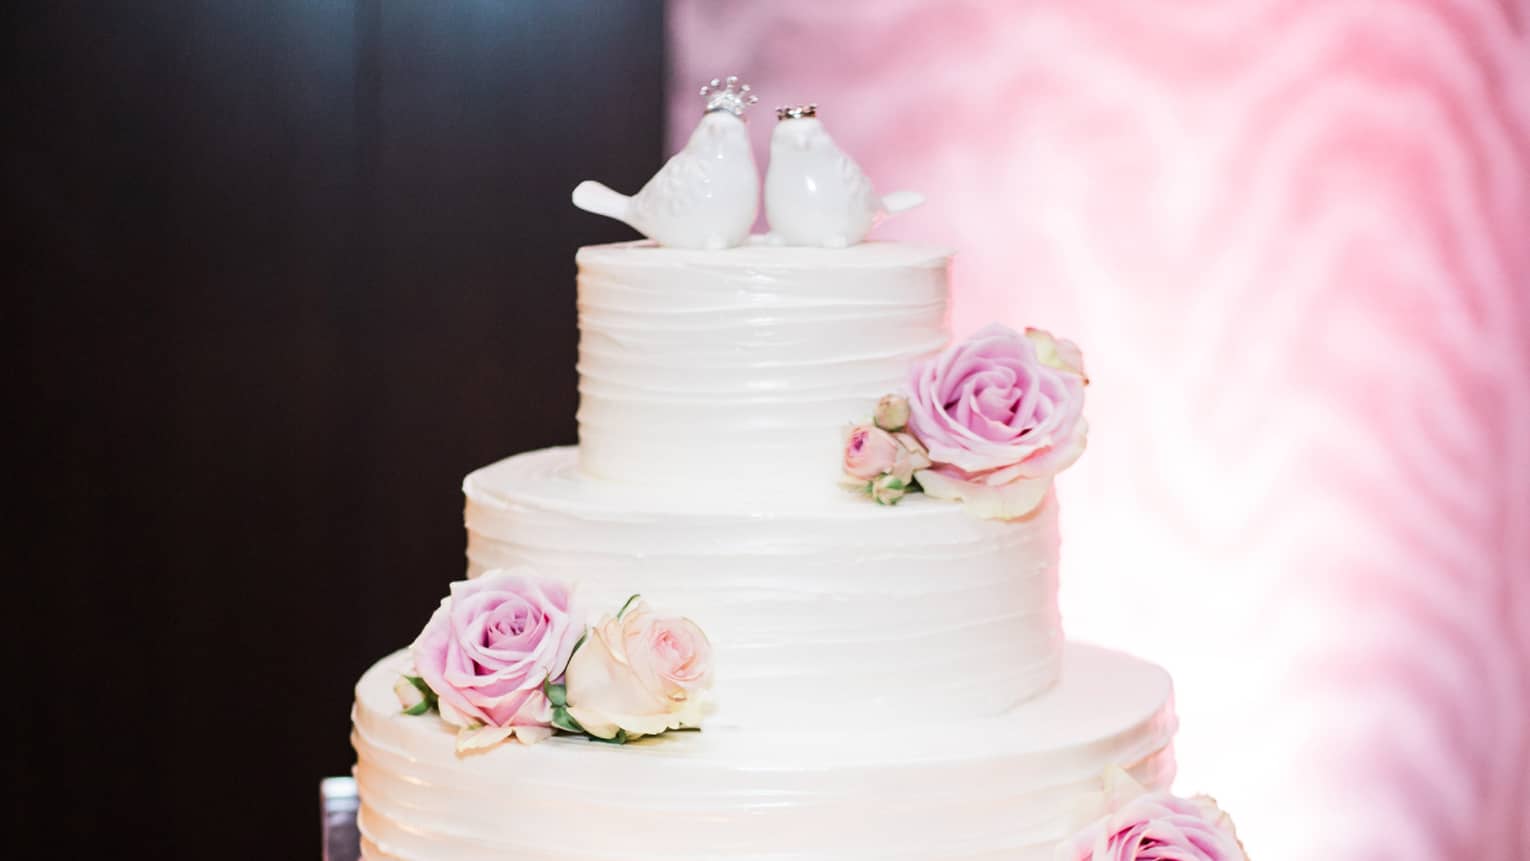 Three tiered white wedding cake decorated with fresh pink roses, two ceramic birds 